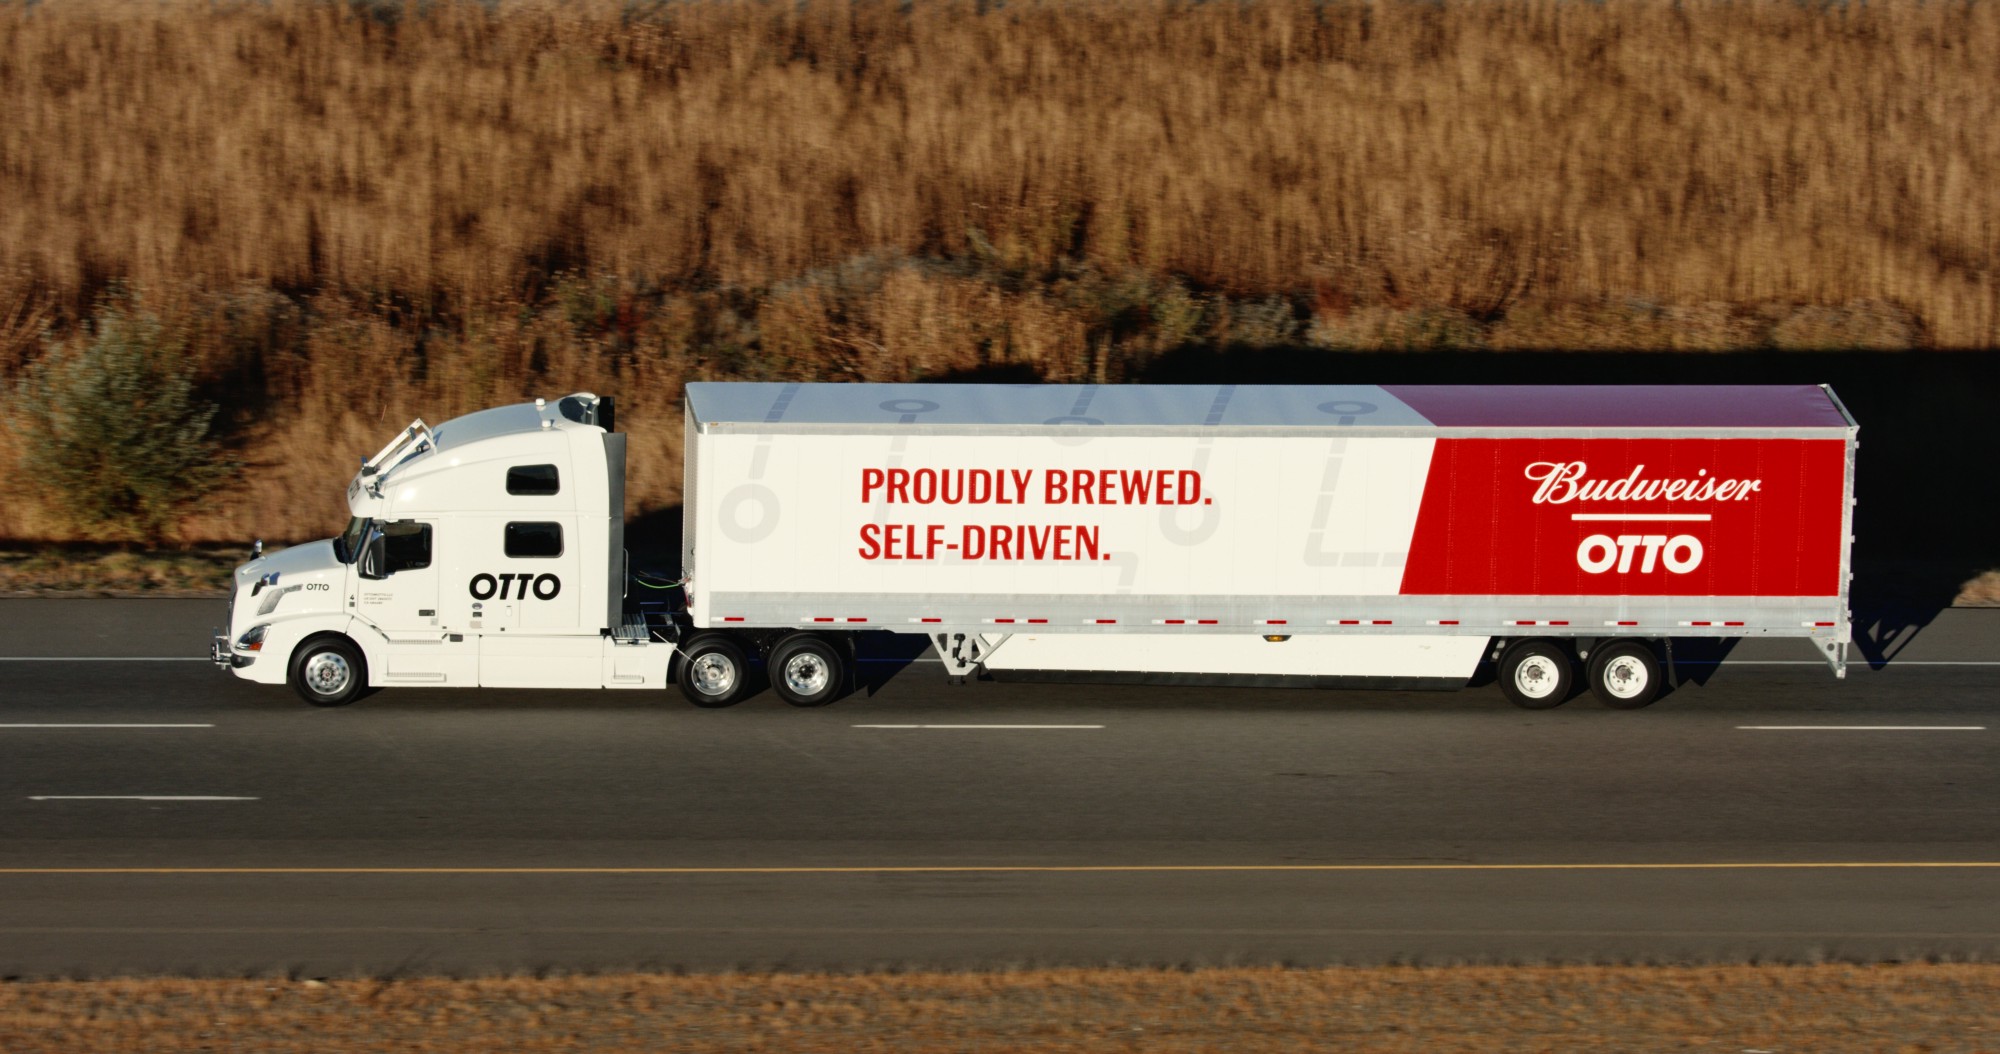 Otto, Uber's self-driving truck start-up, completes maiden voyage transporting beer in Colorado